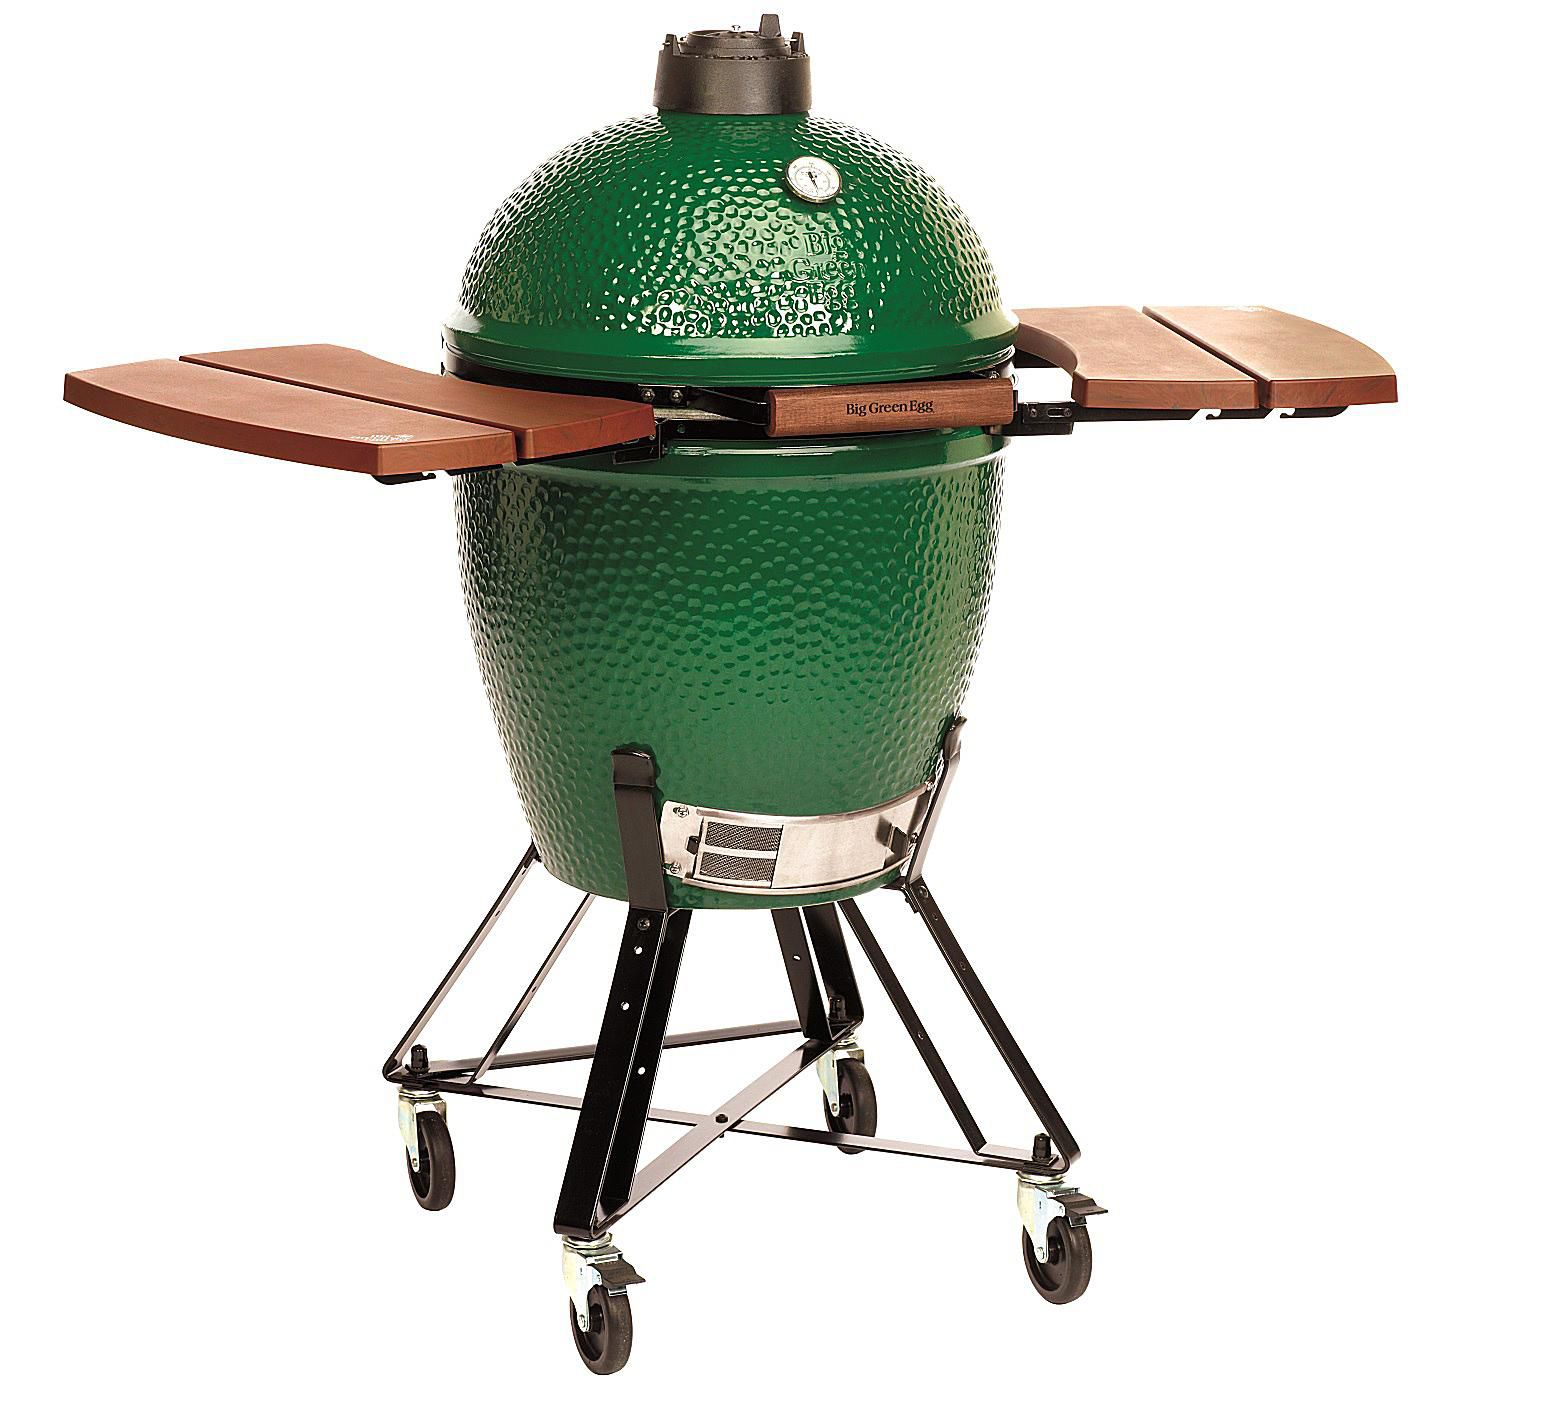 The Top Kamado Ceramic Grills and Smokers for 2017